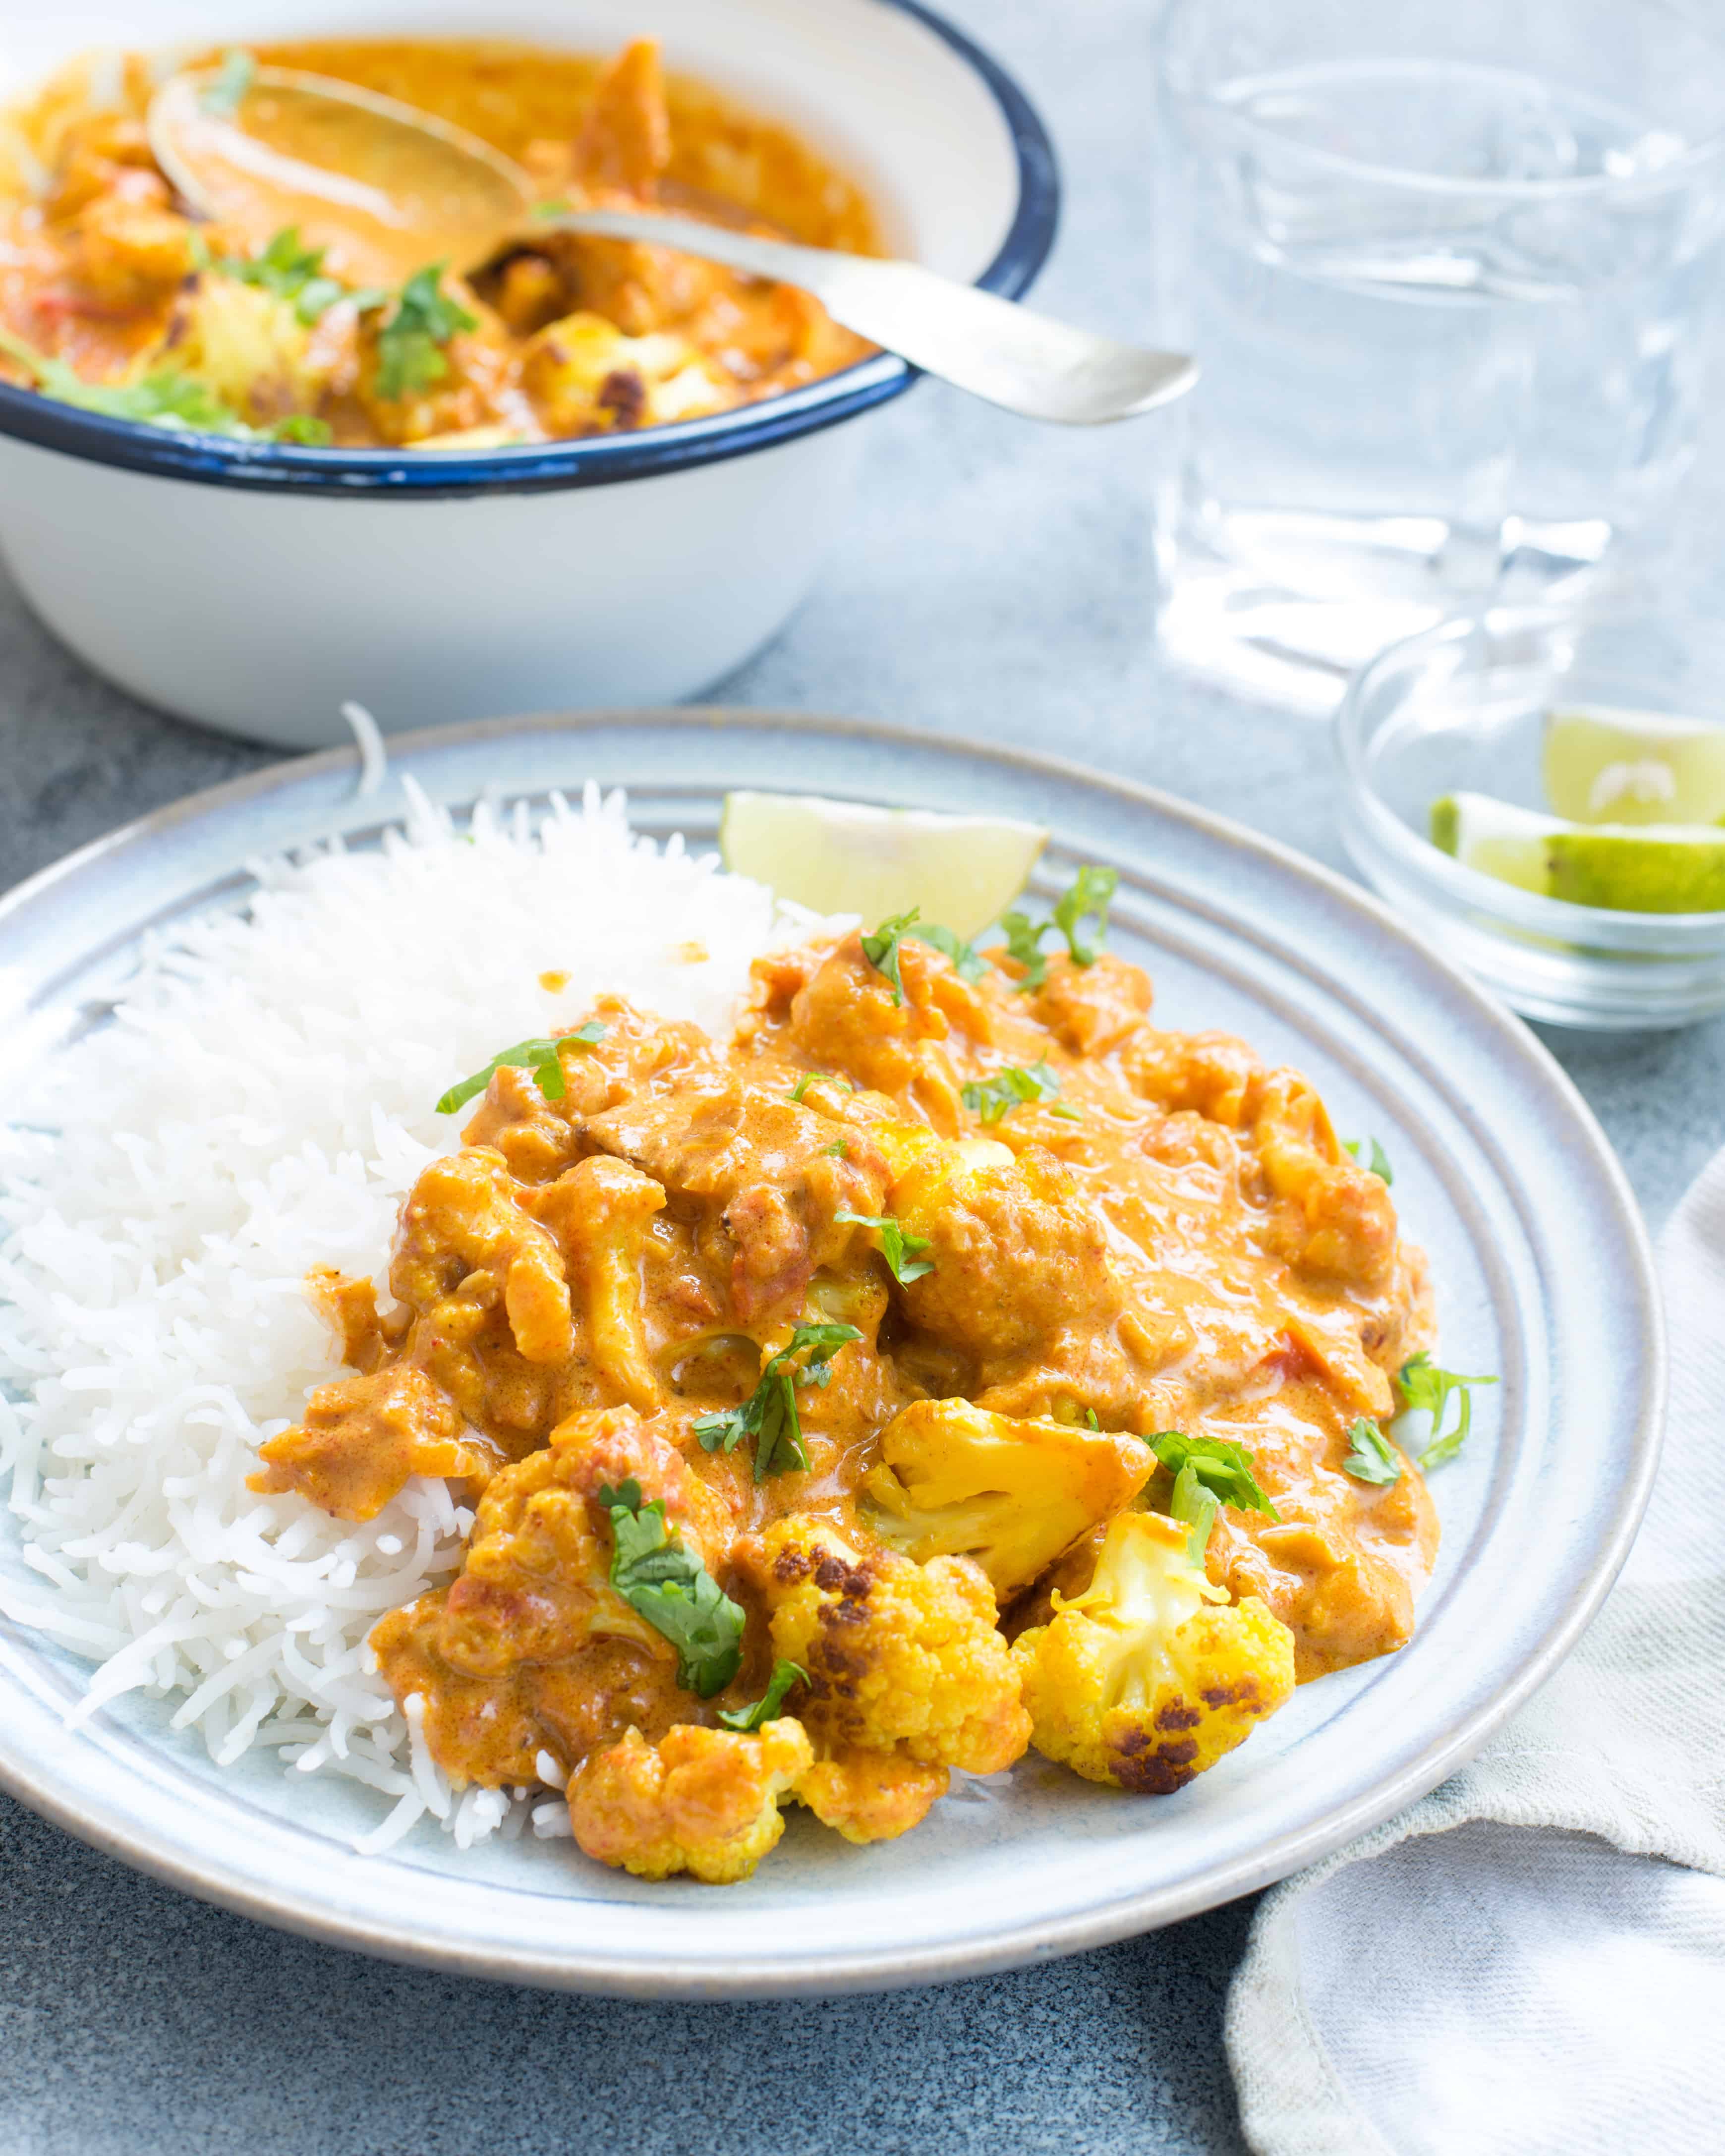 Creamy cauliflower curry is served on a bed of hot white rice.